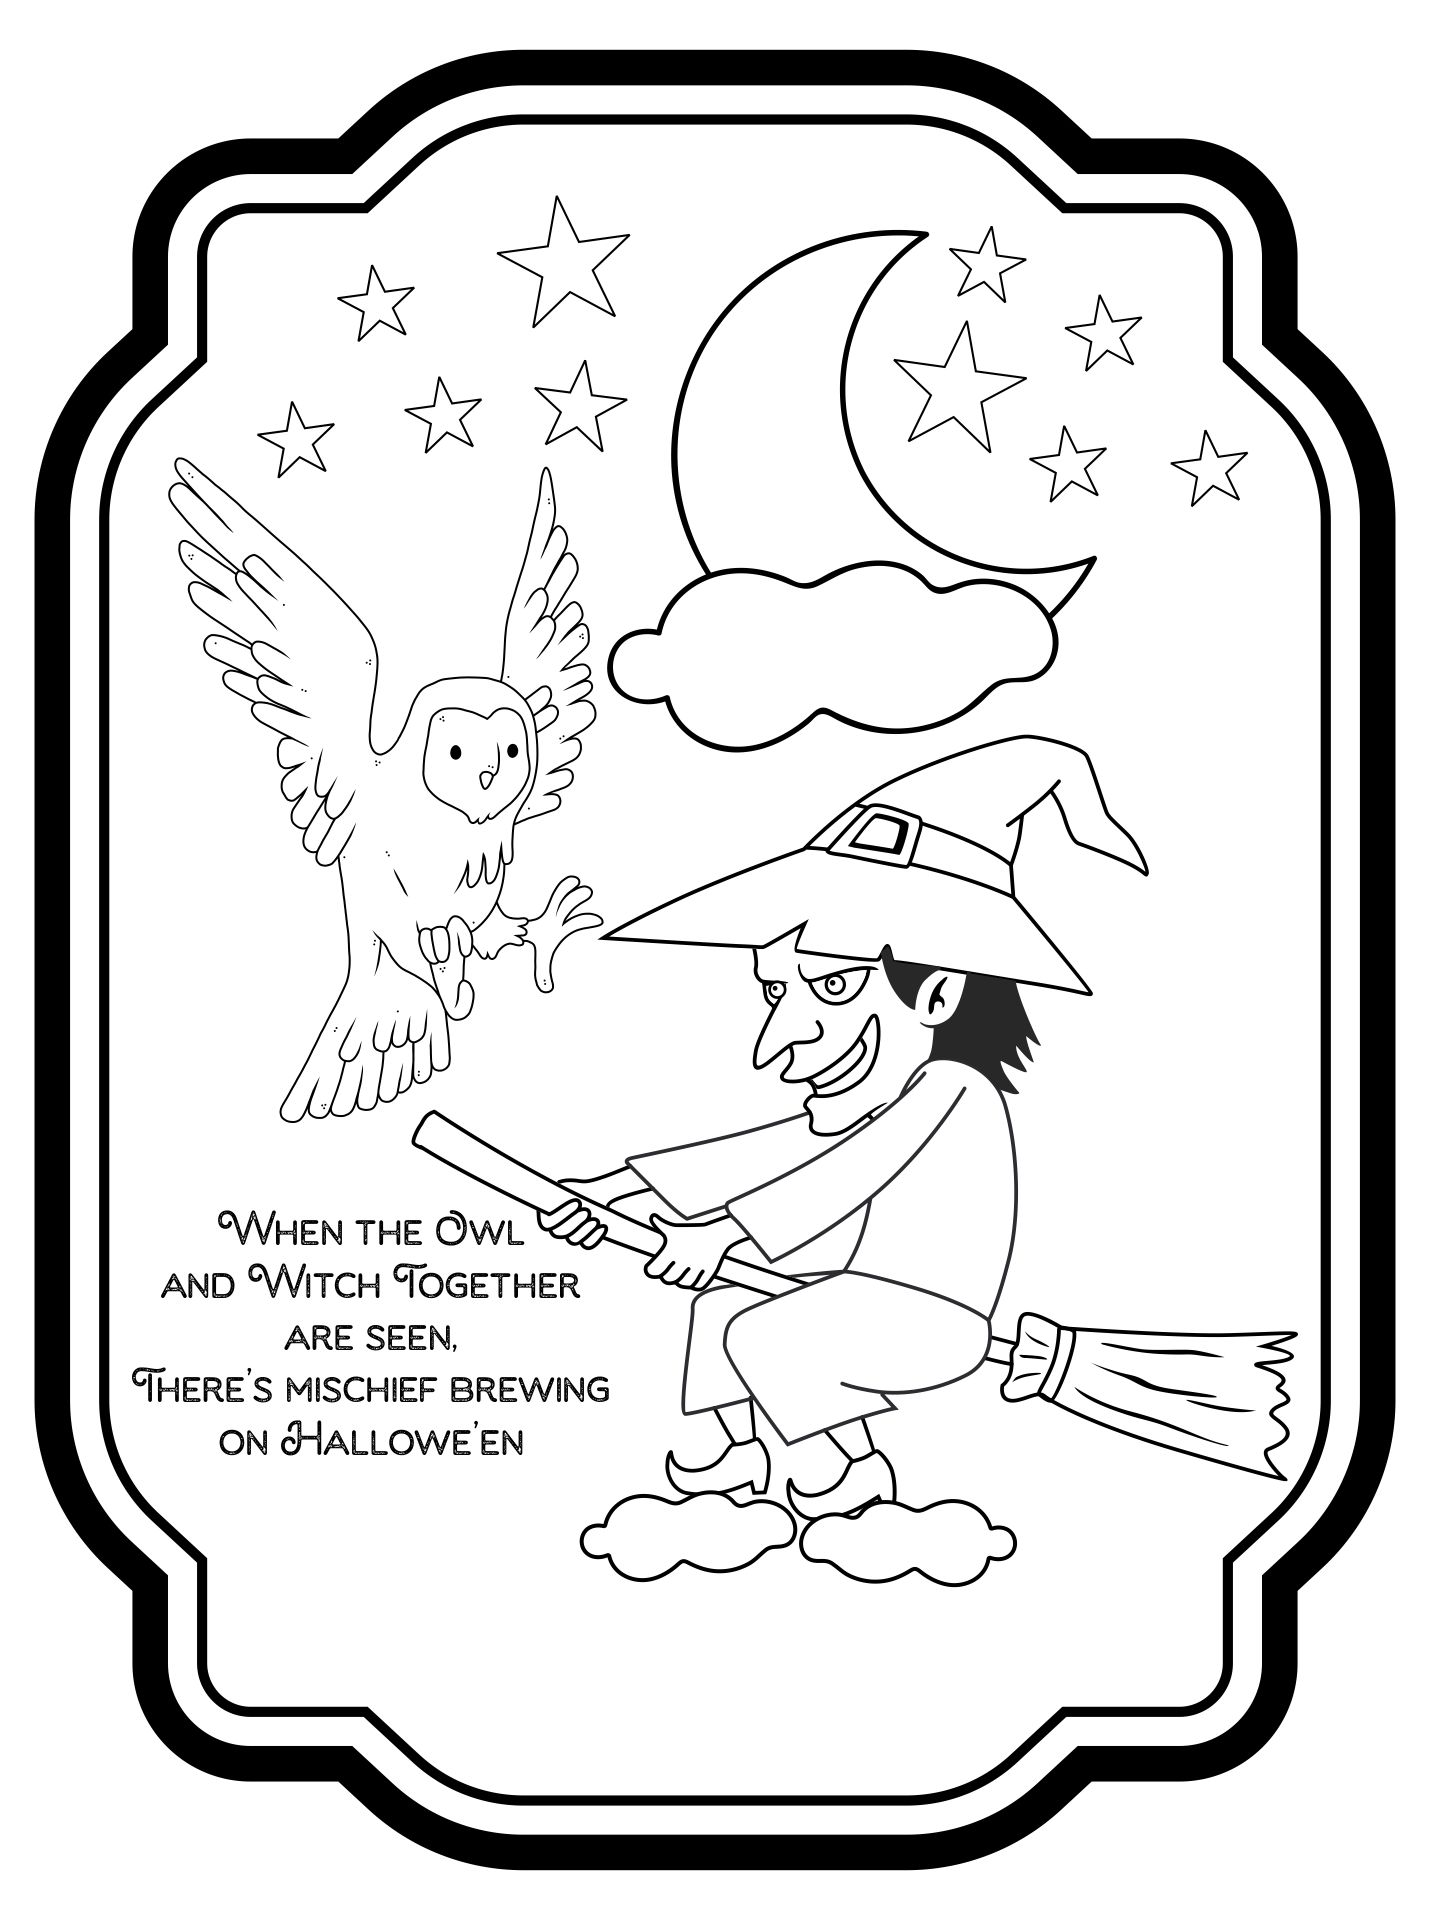 Witch And Owl Vintage Halloween Postcard Coloring Page Printable